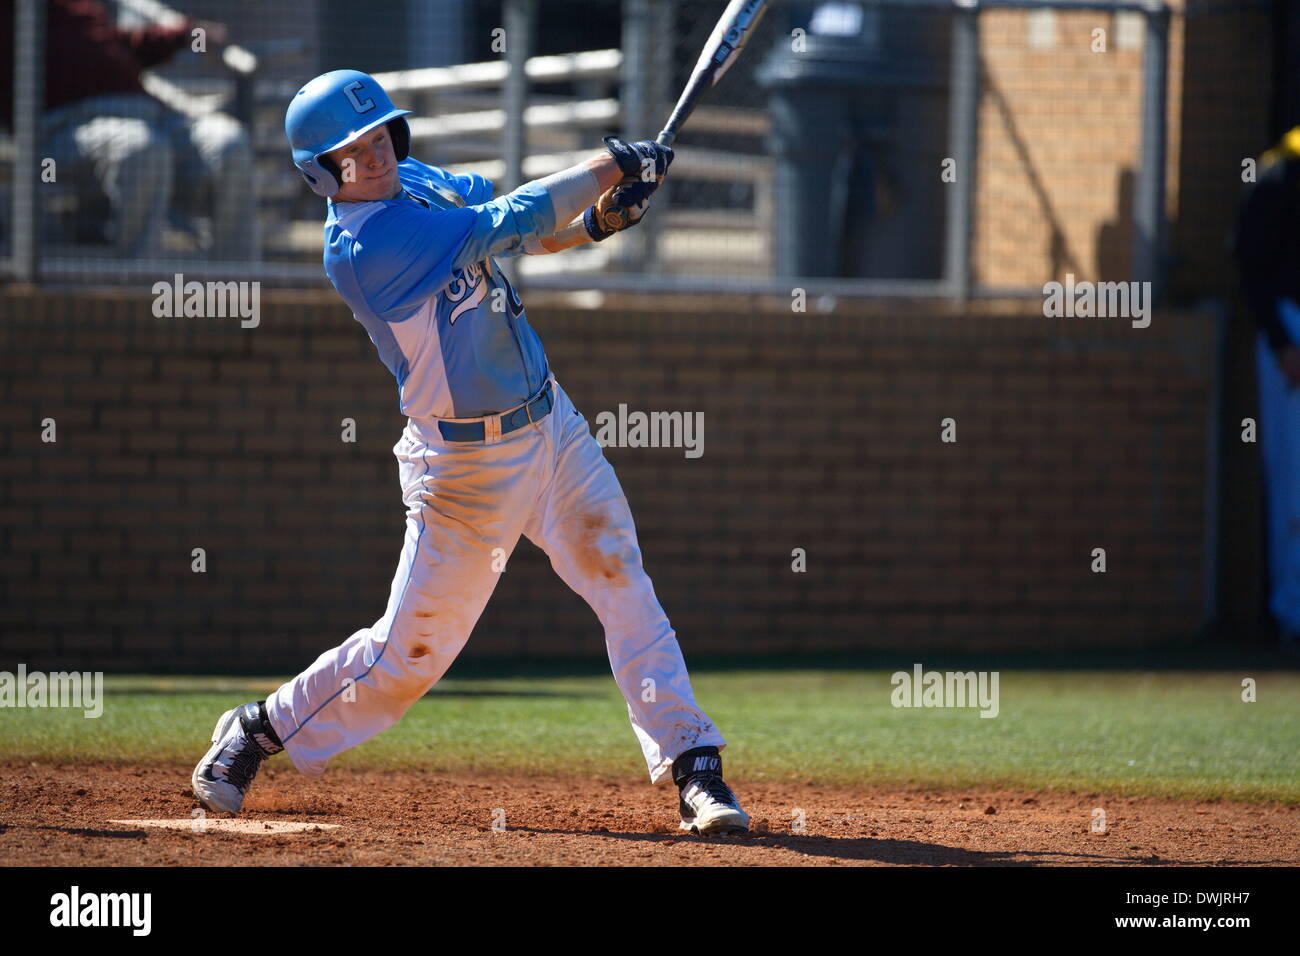 Kennesaw, Georgia, USA.  March 8, 2014 -- Logan Boyher at bat during the first game of Saturday's doubleheader between Columbia University and Kennesaw State University. The teams split the doubleheader.  Columbia one the first game 9-3.  KSU won the night cap 15-1. Credit:  Wayne Hughes | Alamy Live News Stock Photo